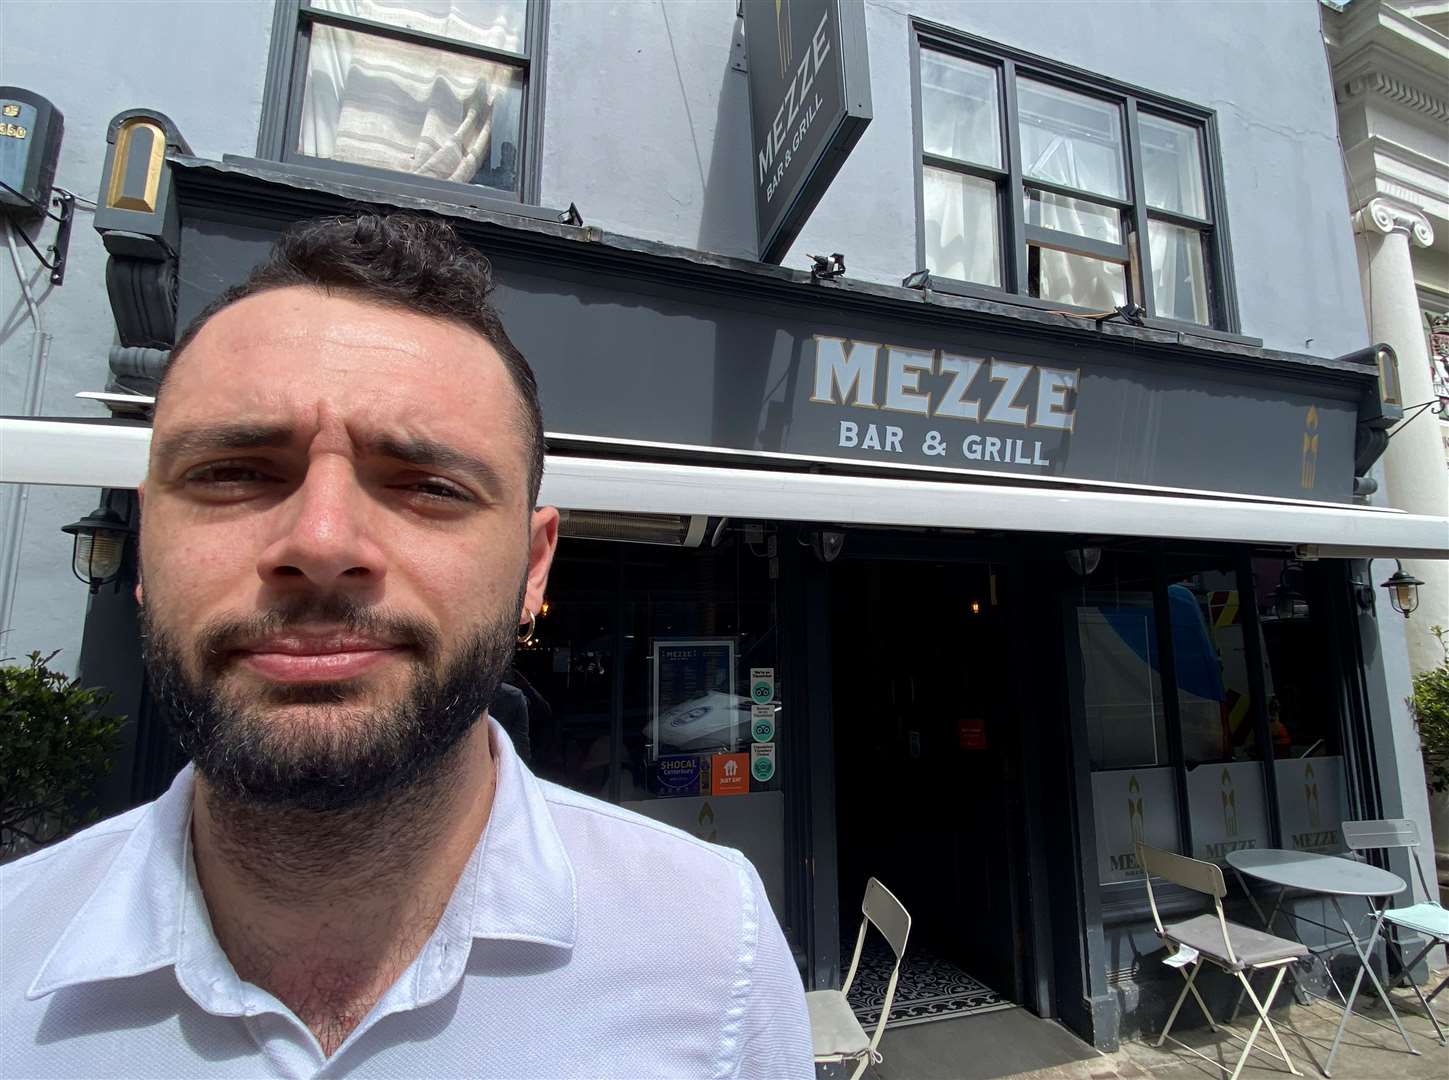 Mezze manager Antontio Coppola says the roadworks on St Peter's Street, Canterbury have cause a 70% drop in business